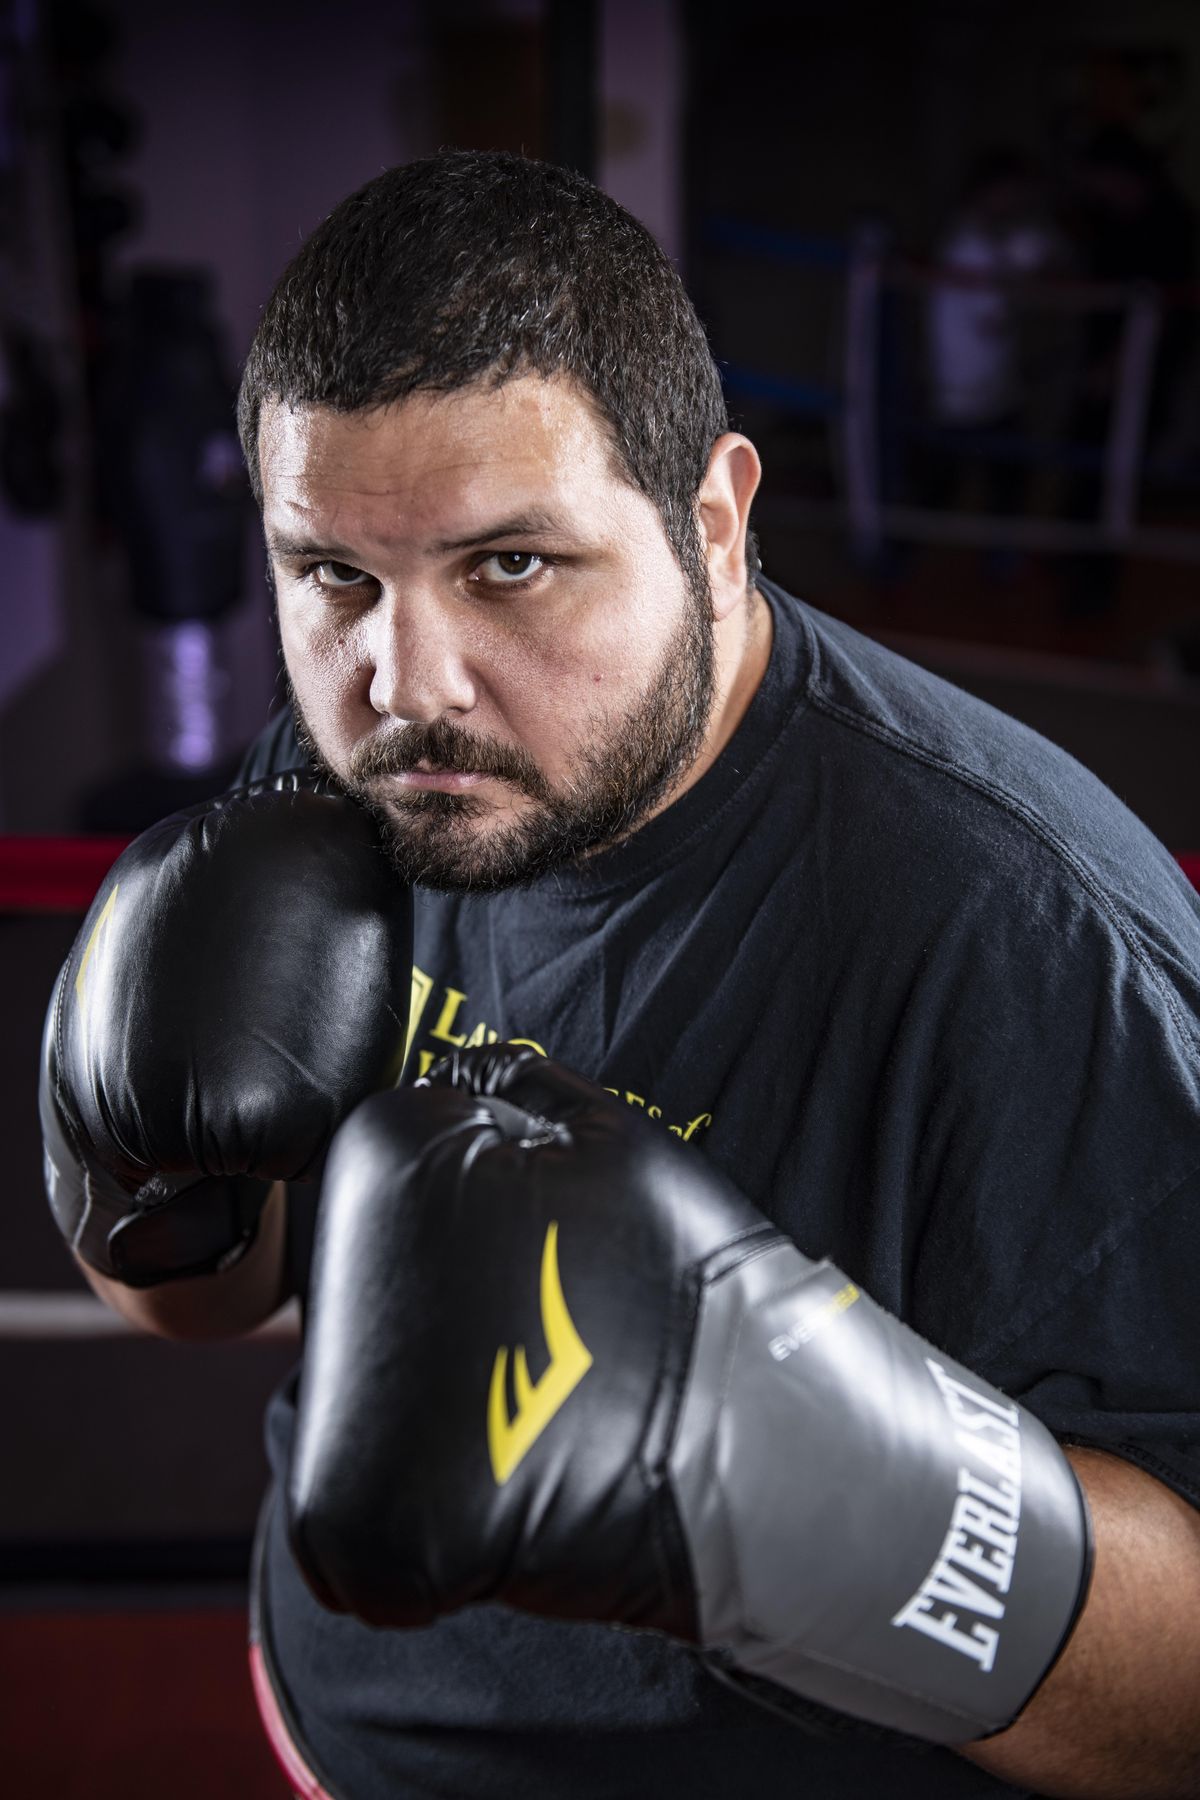 1Local heavyweight boxer Chauncy Welliver is scheduled to fight Saturday night at the Coeur d